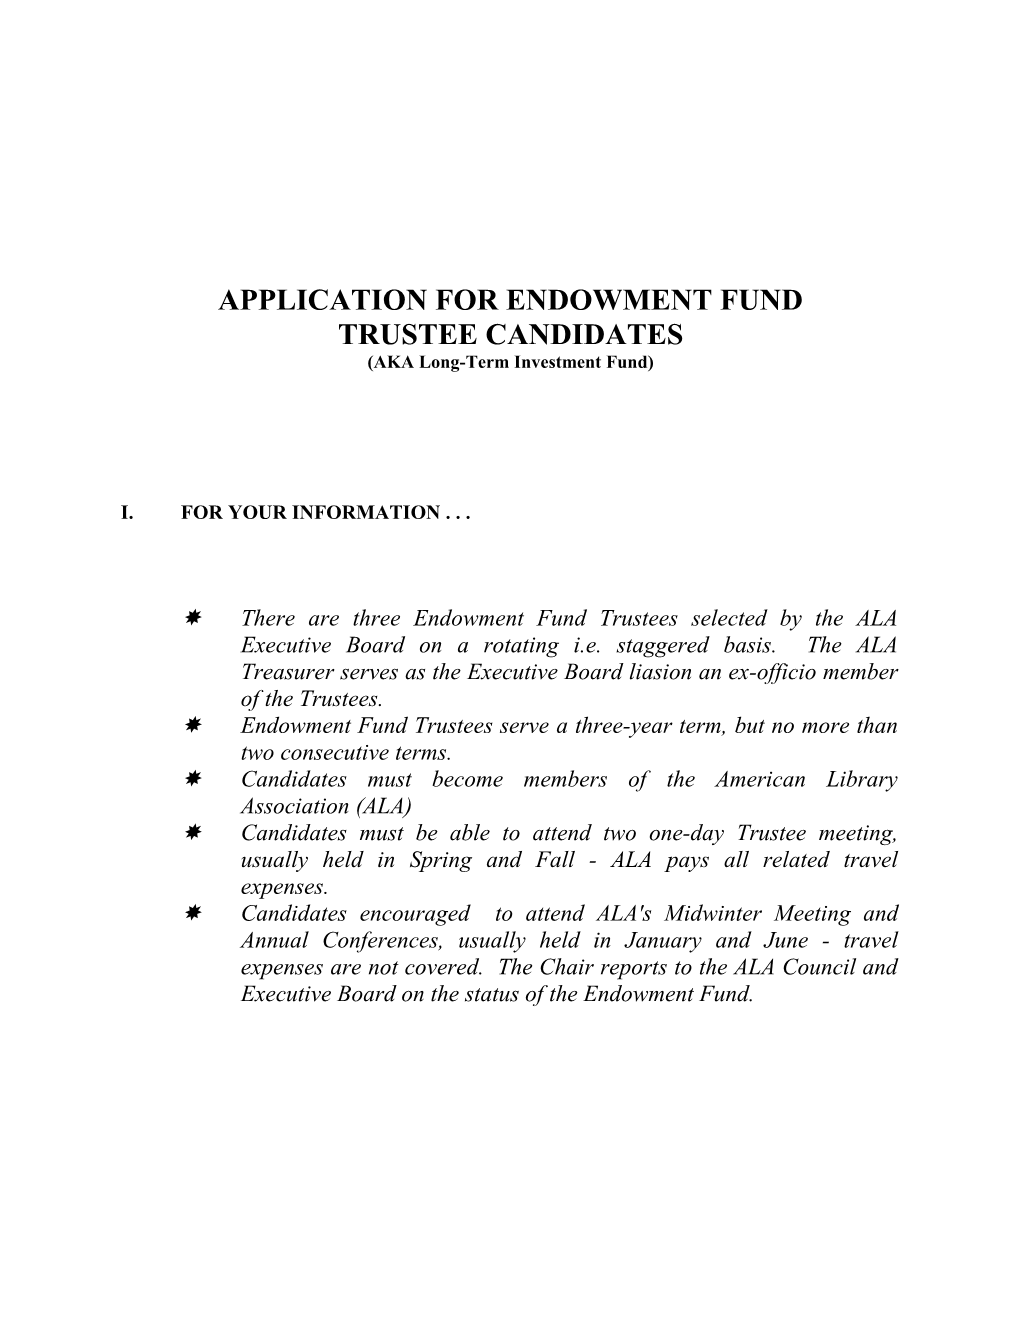 Application for Endowment Trustee